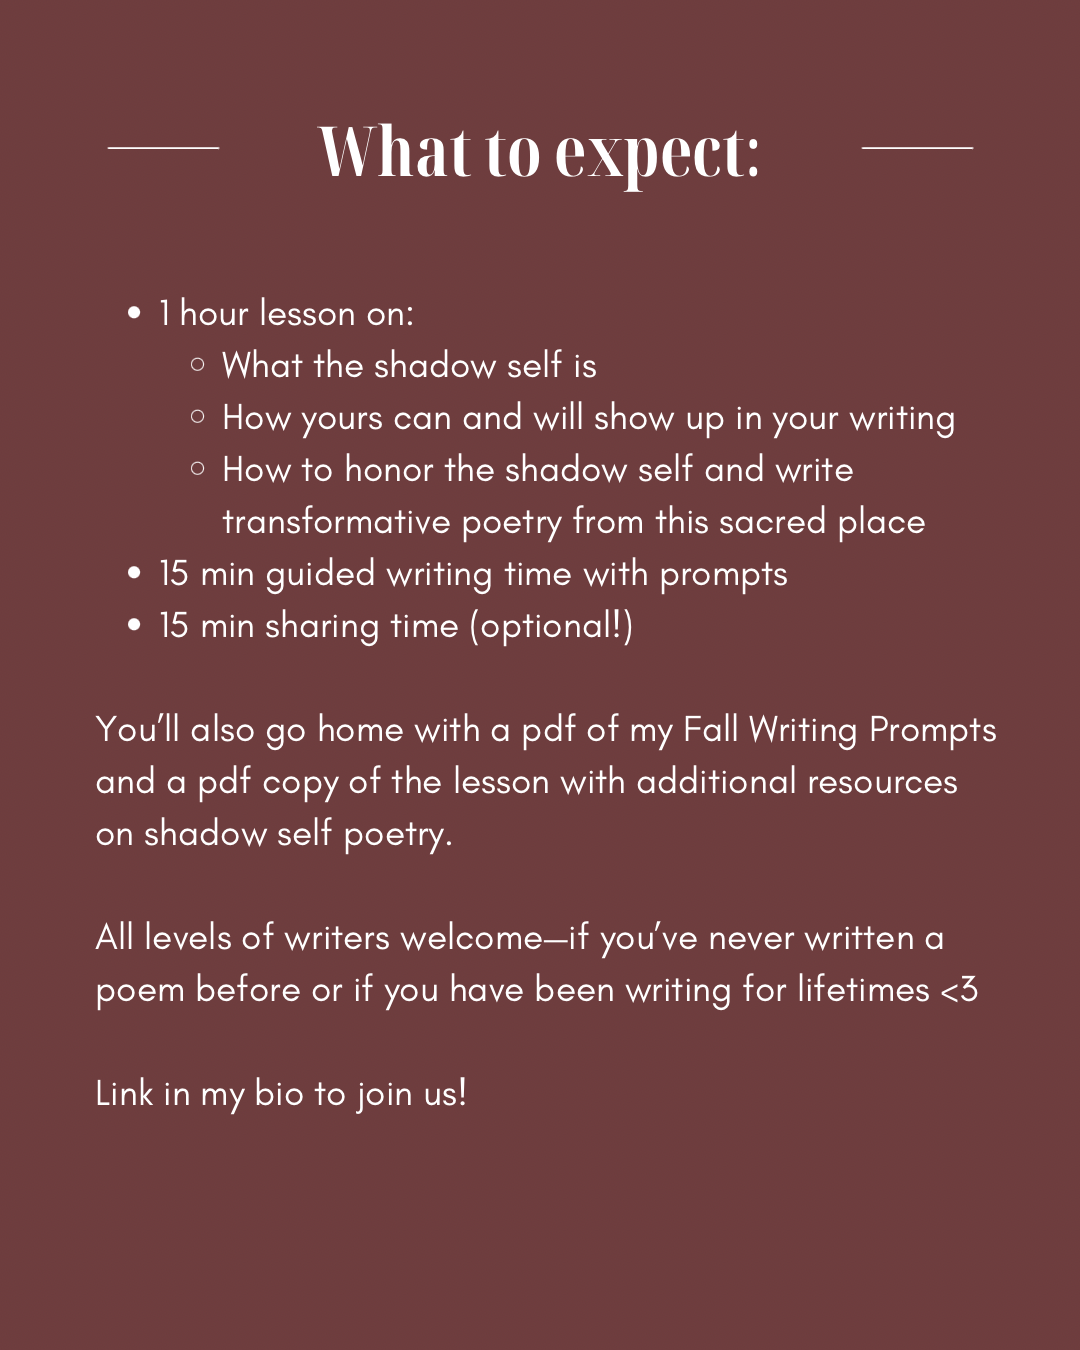 Writing from the Shadow Self Workshop